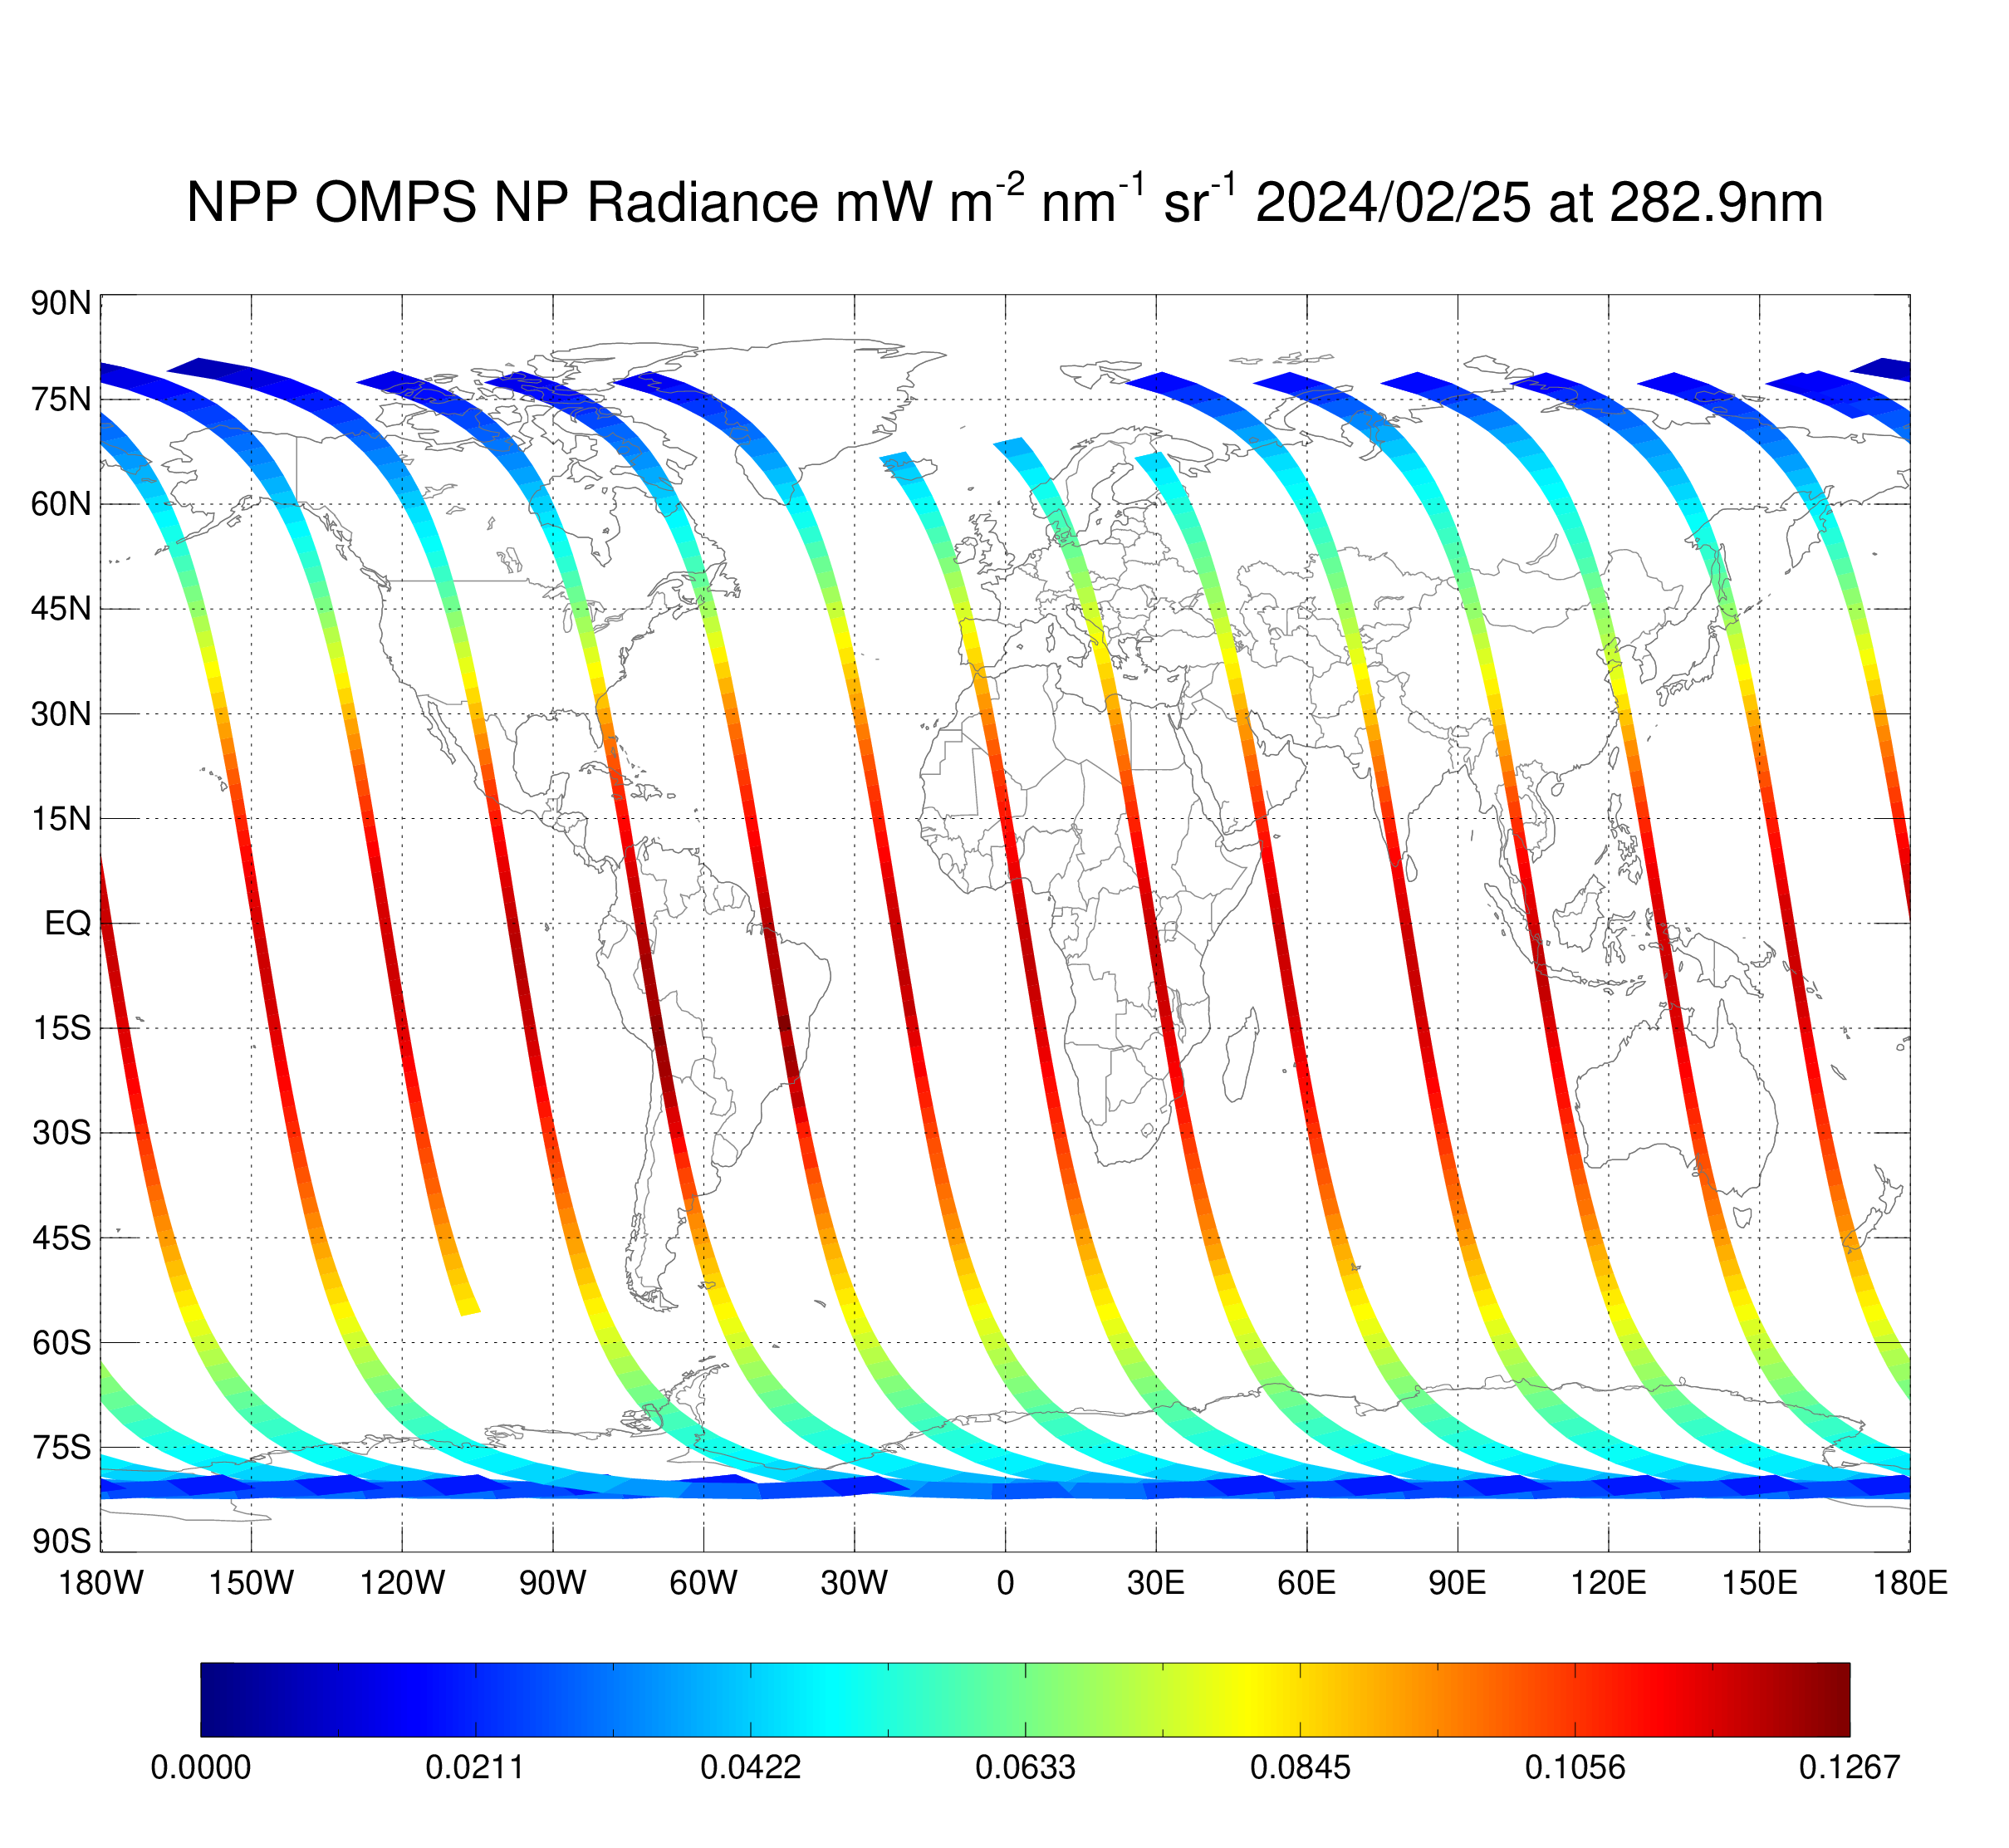 NPP OMPS Nadir Profiler  - NP Earth View Radiance - Radiance Map at 283.0 nm - 02/25/2024